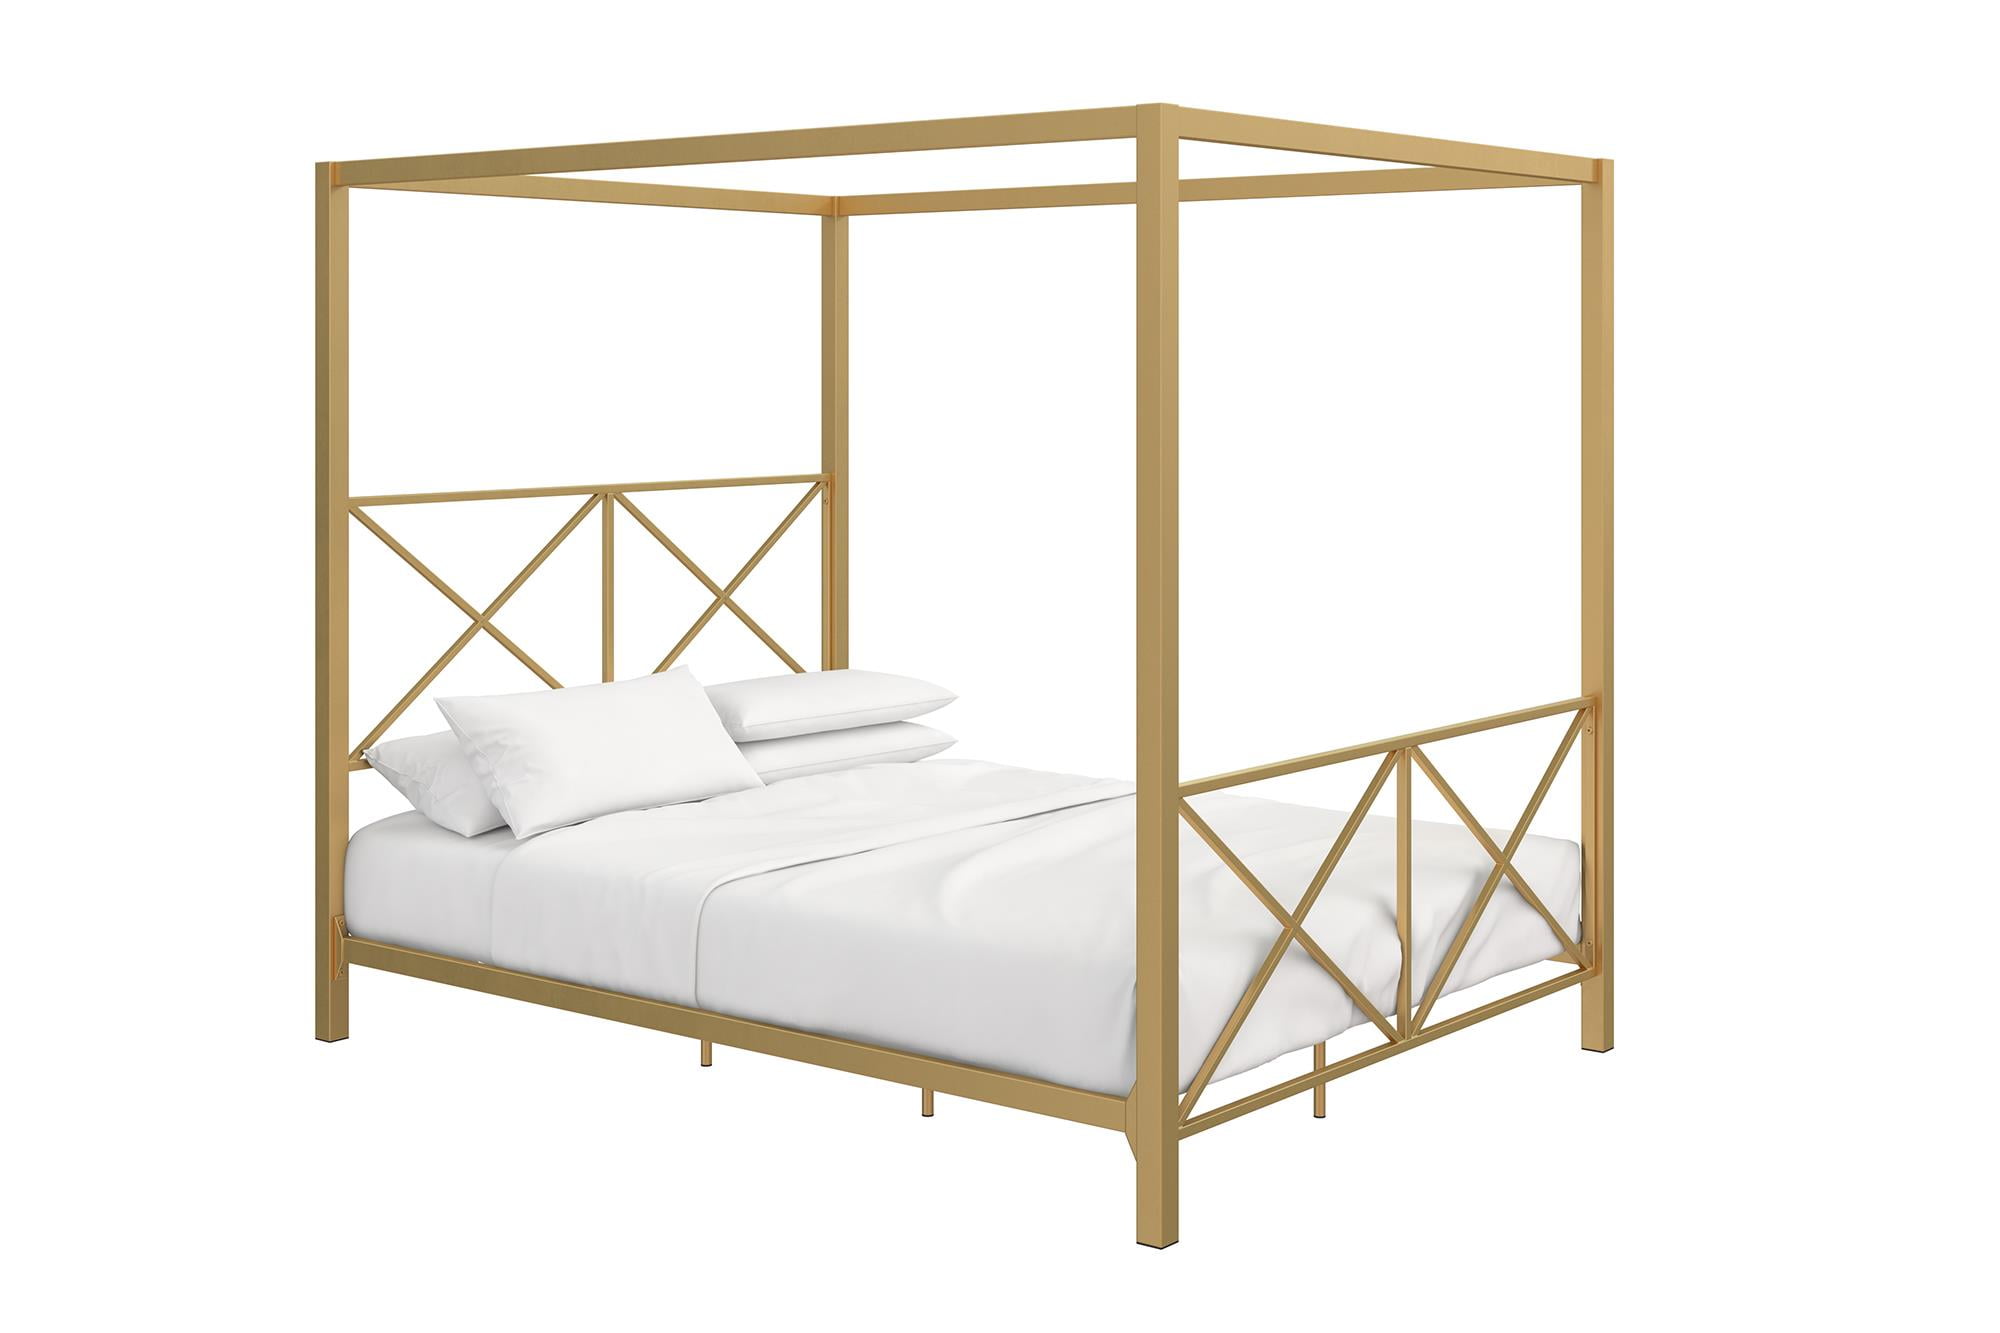 DHP Rosedale Metal Canopy Bed, Queen Size, Gold - Walmart.com